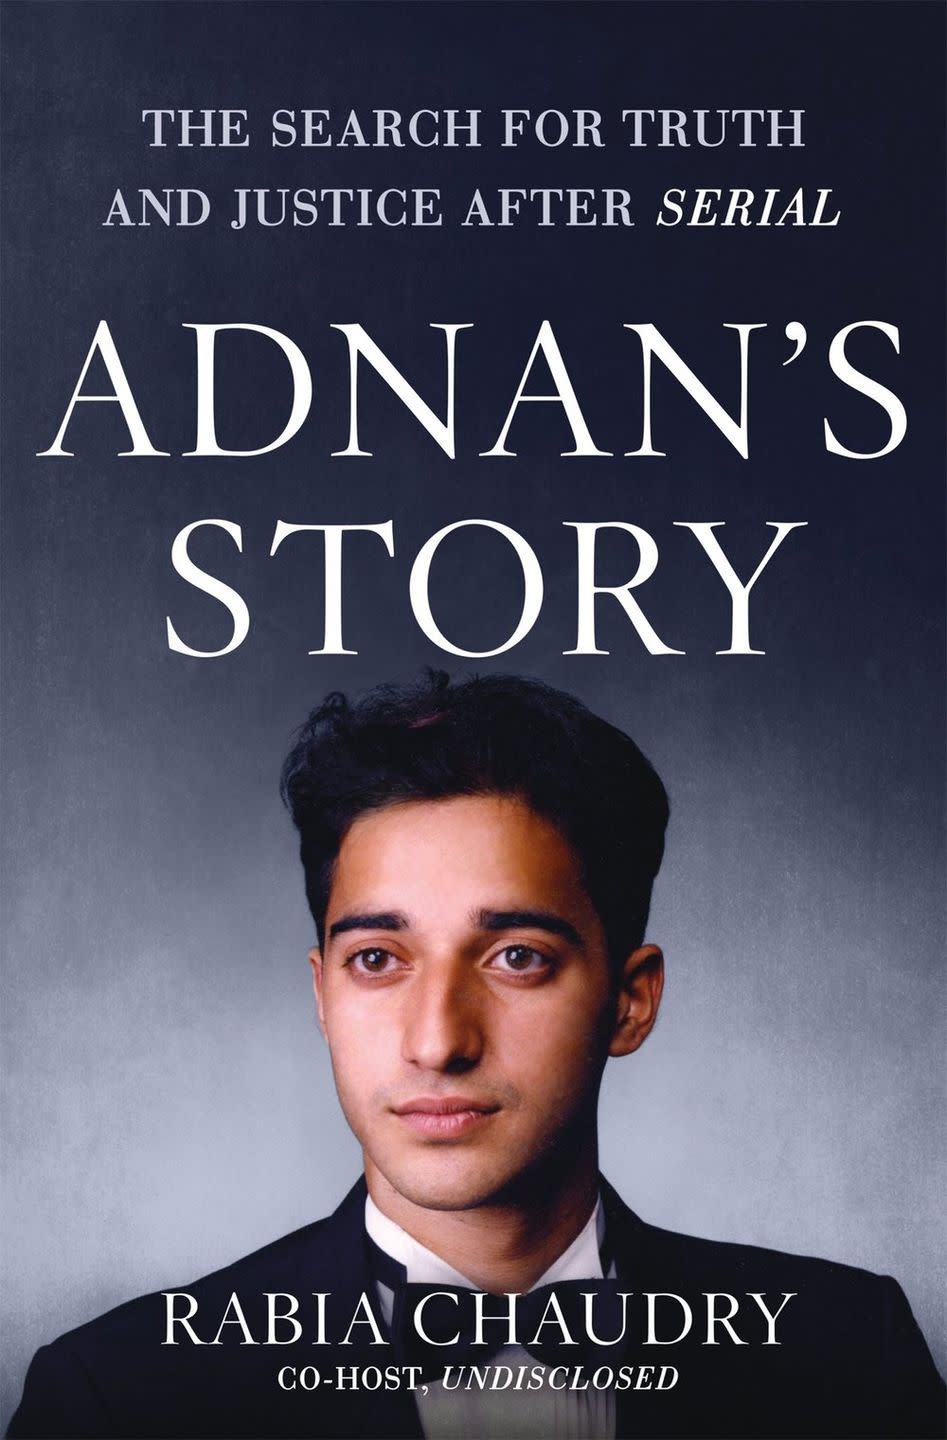 Taurus: Adnan's Story: The Search for Truth and Justice After Serial